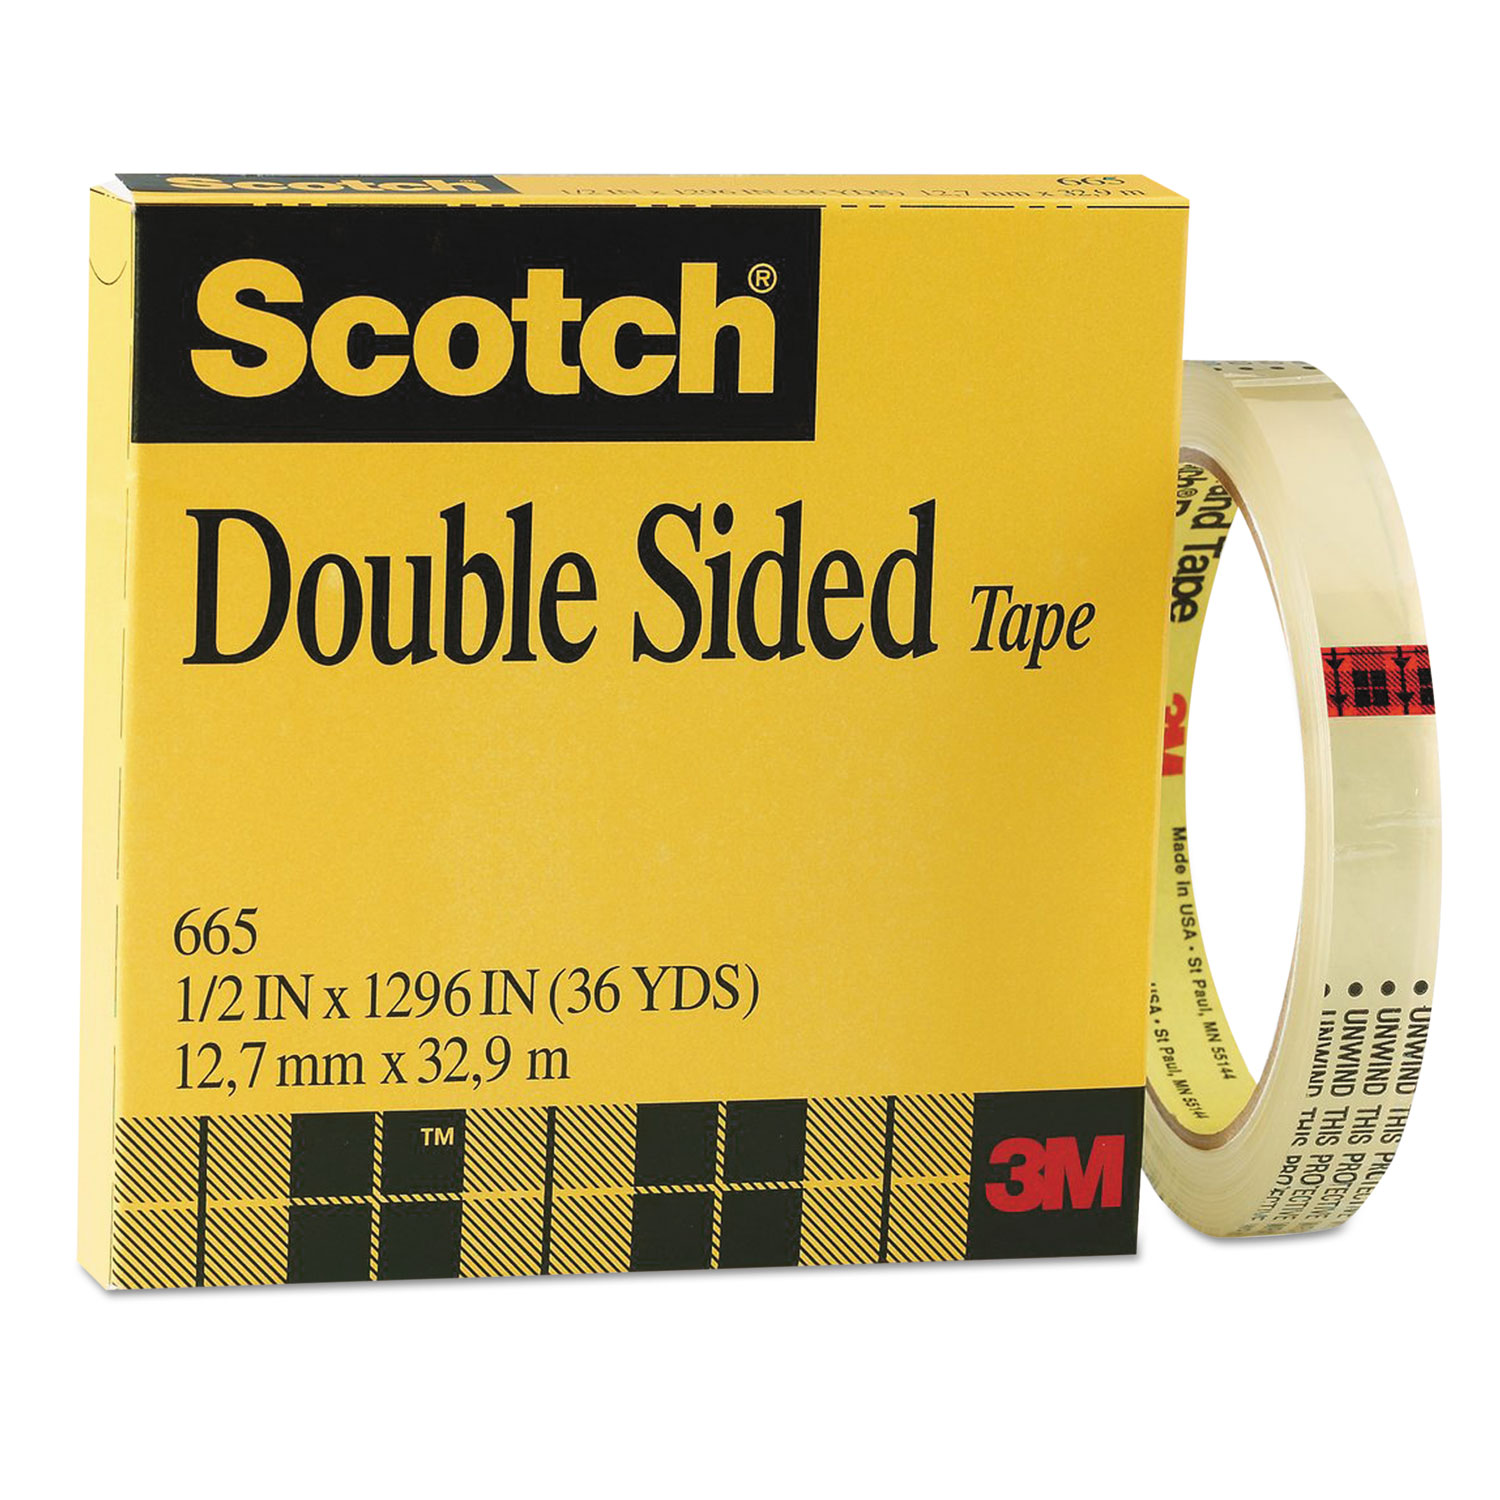 Double sided tape - 021200592829